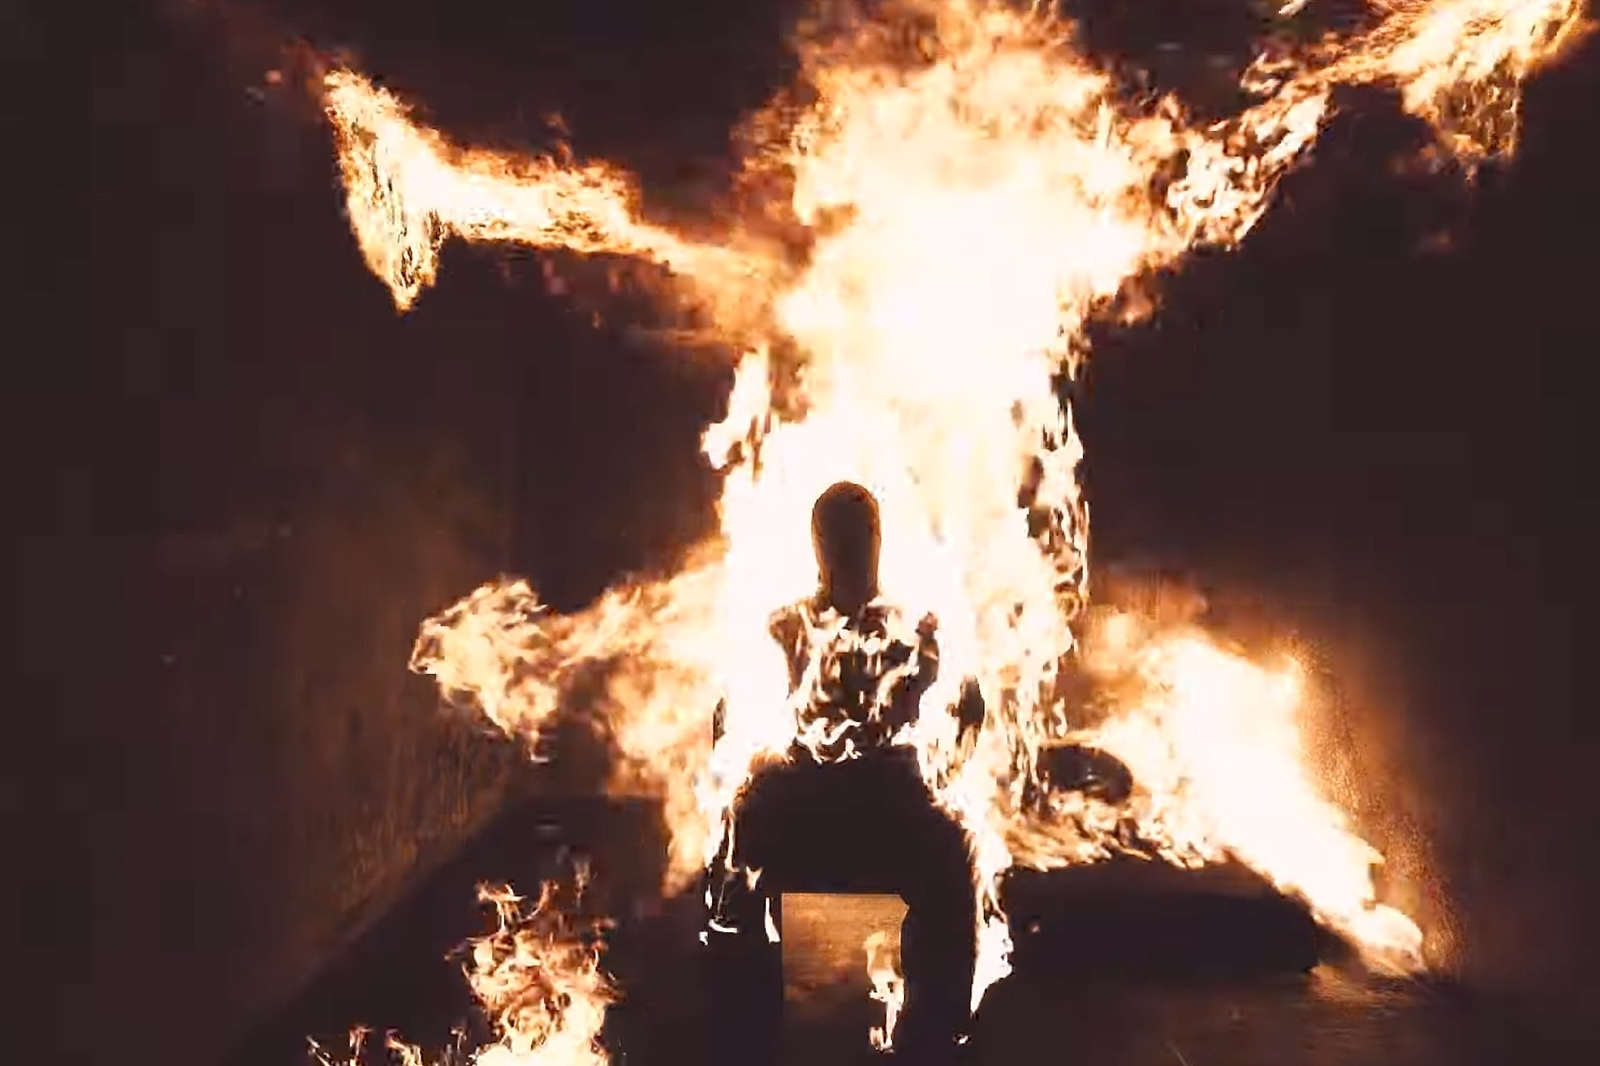 Kanye West sets himself on fire in new 'Come To Life' video